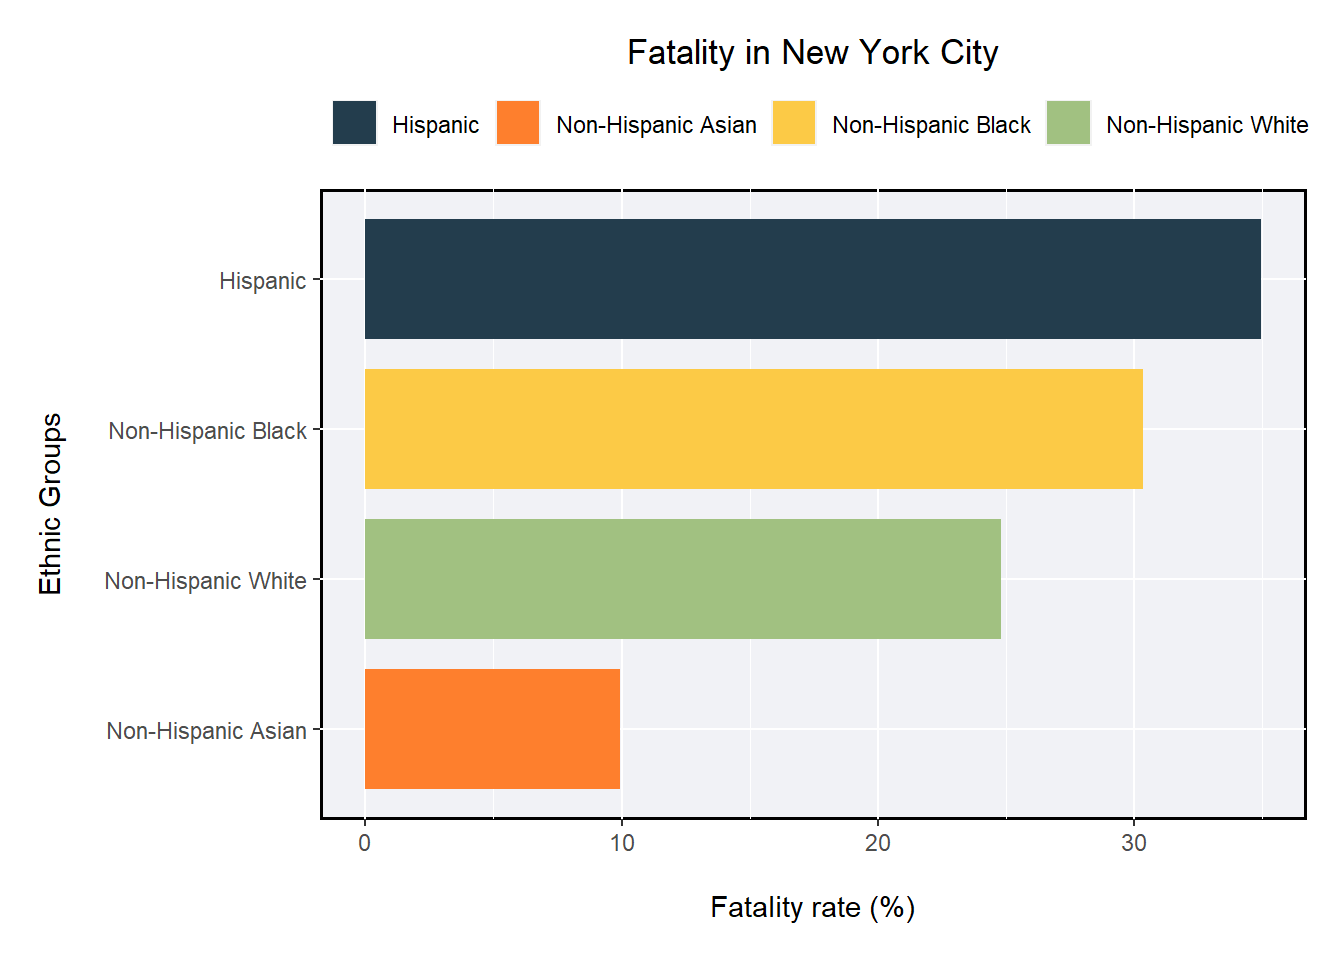 The Bar plot shows the fatality rate in New York city. The most affected racial and ethnic group is Hispanic community.